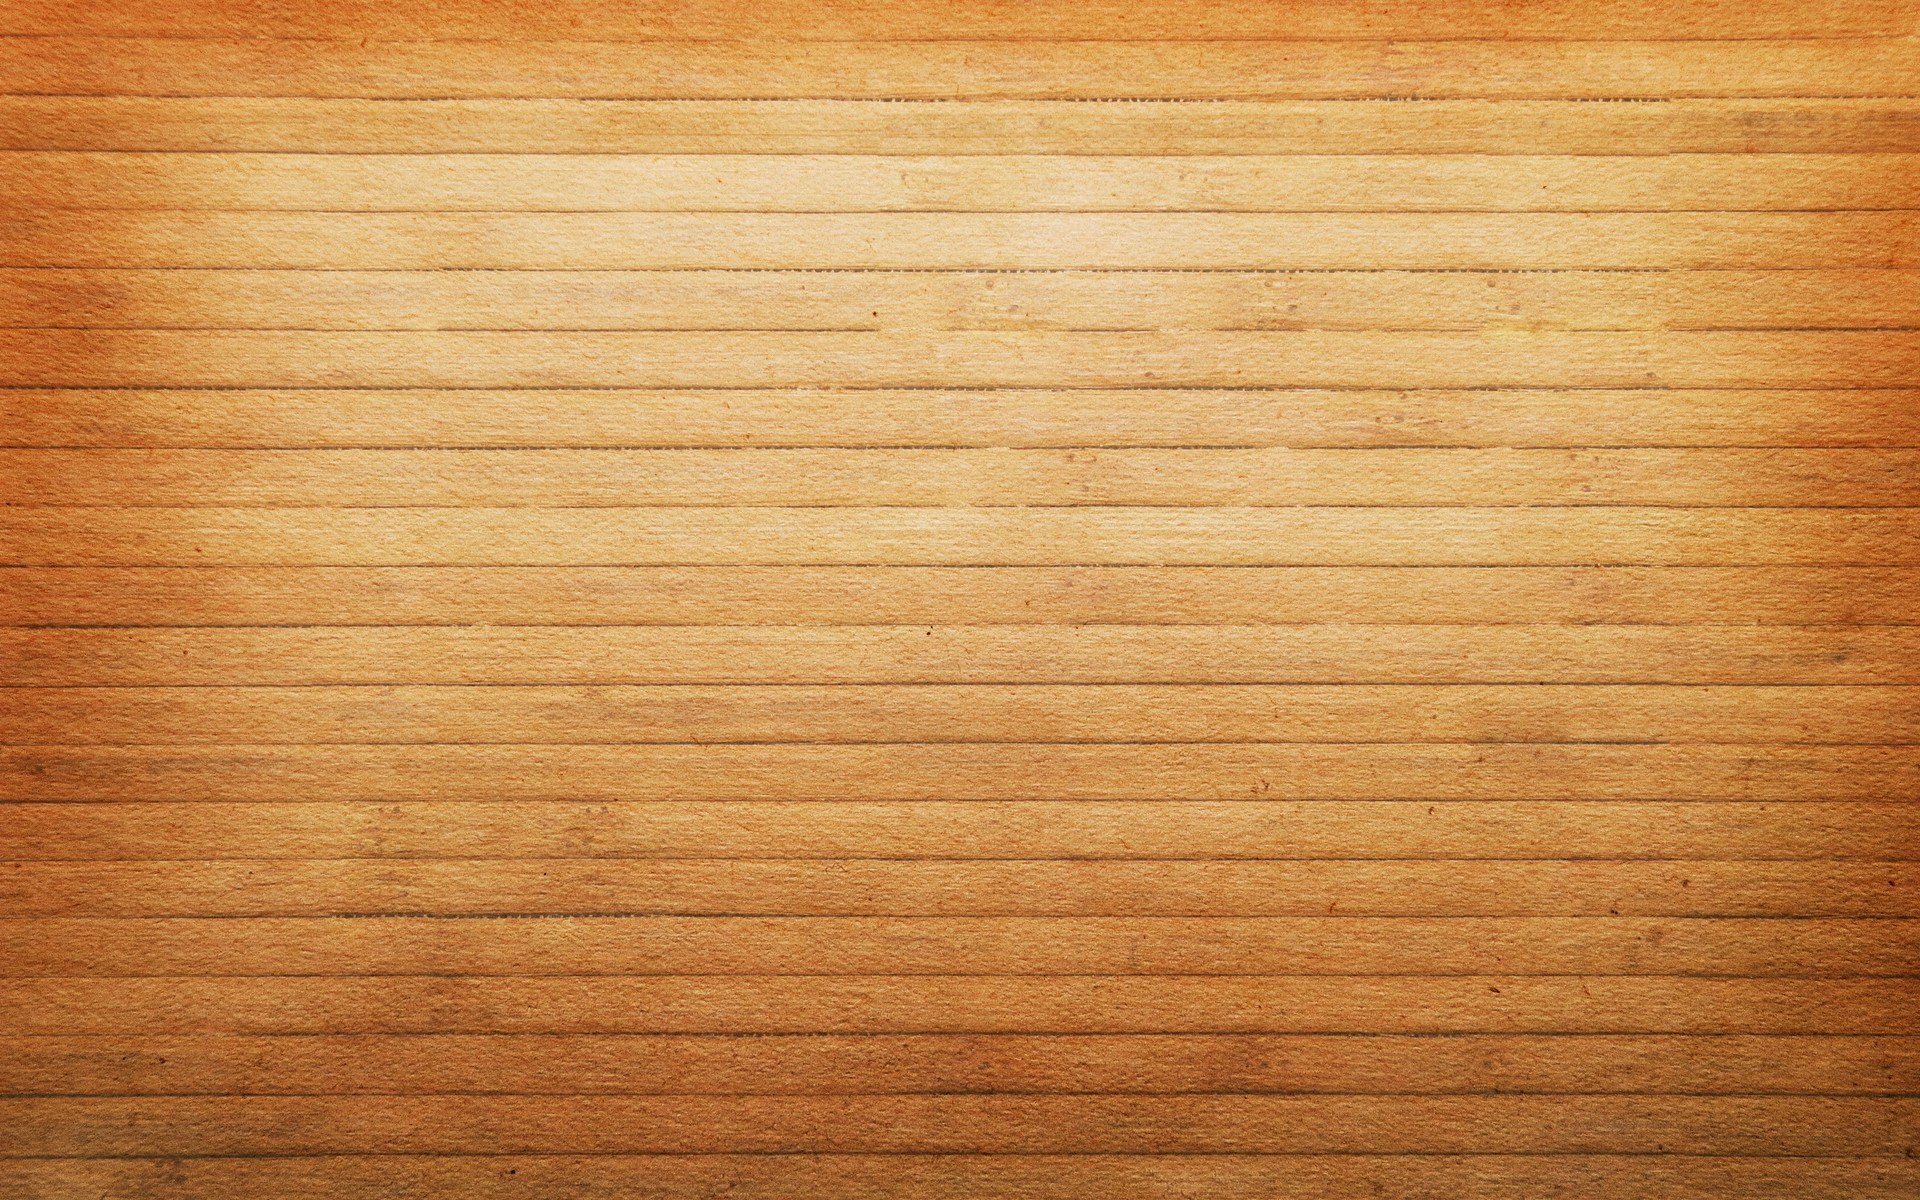 Wood Texture Background 19201200 132917 HD Wallpaper Res 1920x1200